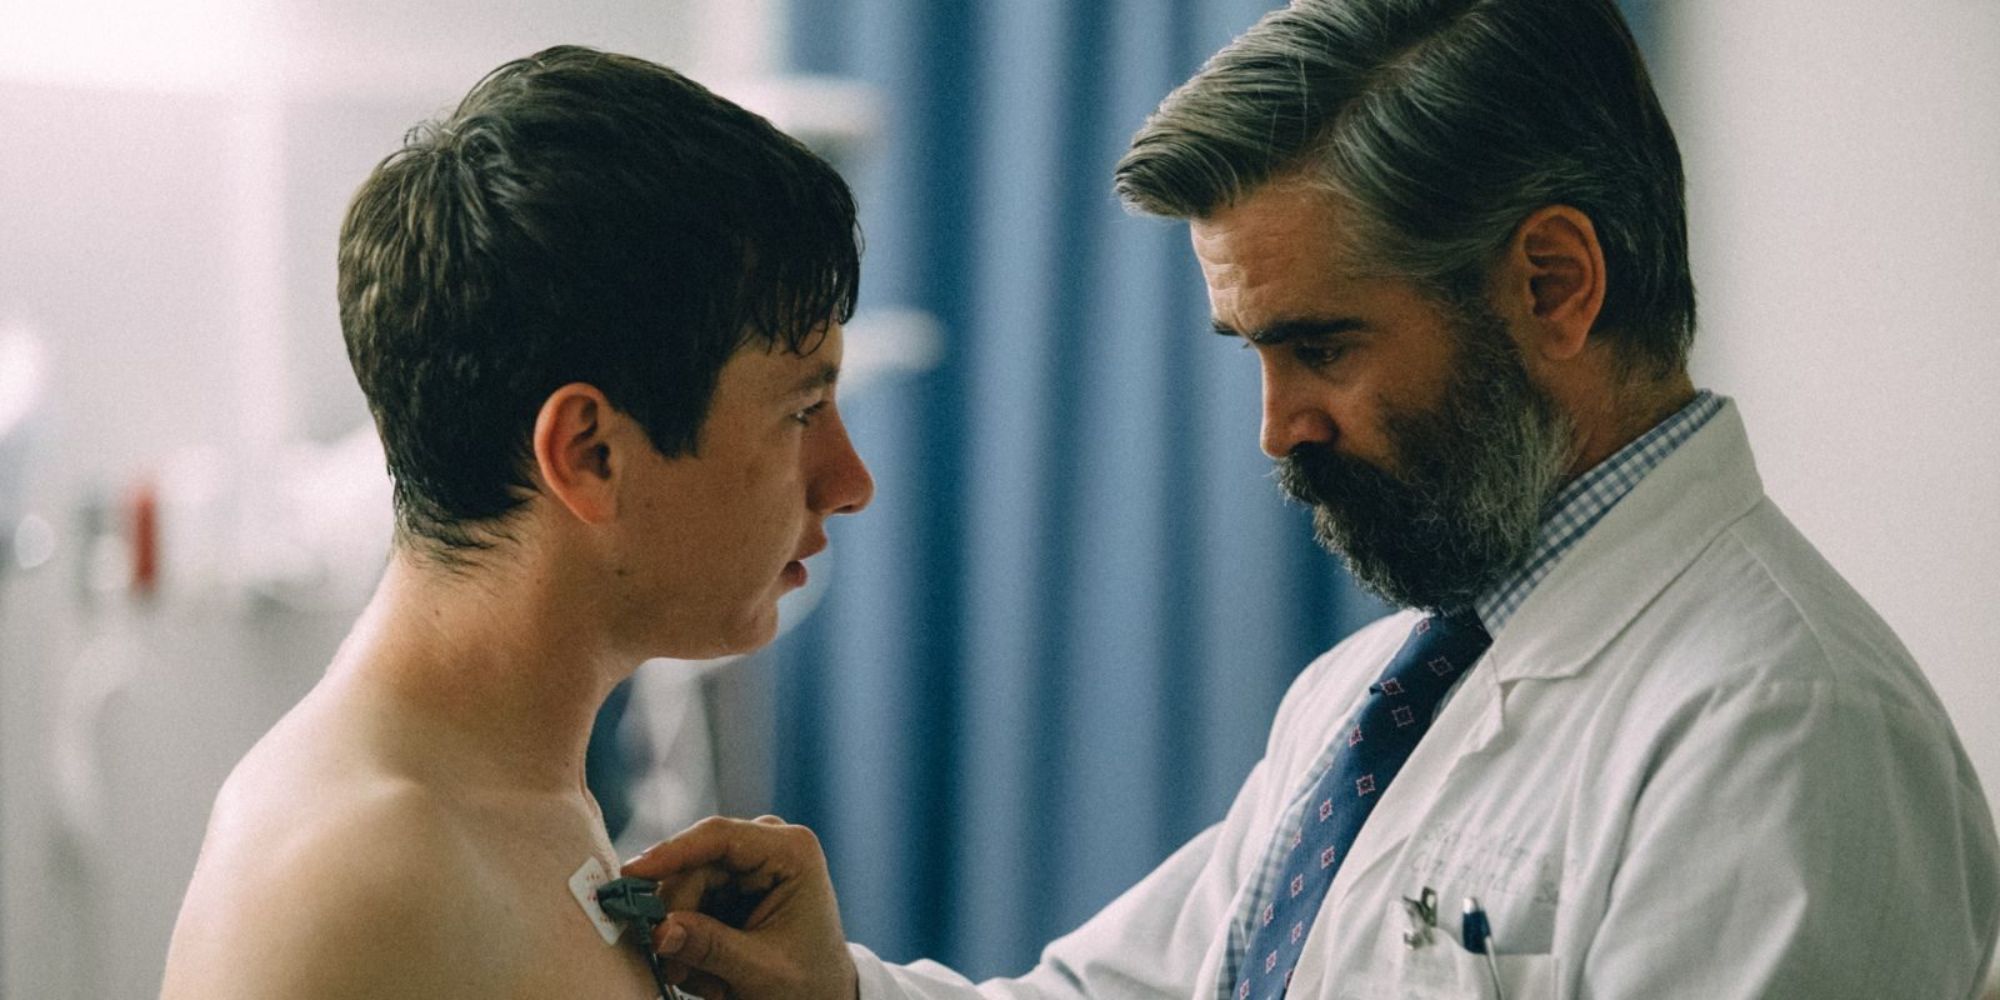 Steven performing tests on Martin in The Killing of a Sacred Deer.